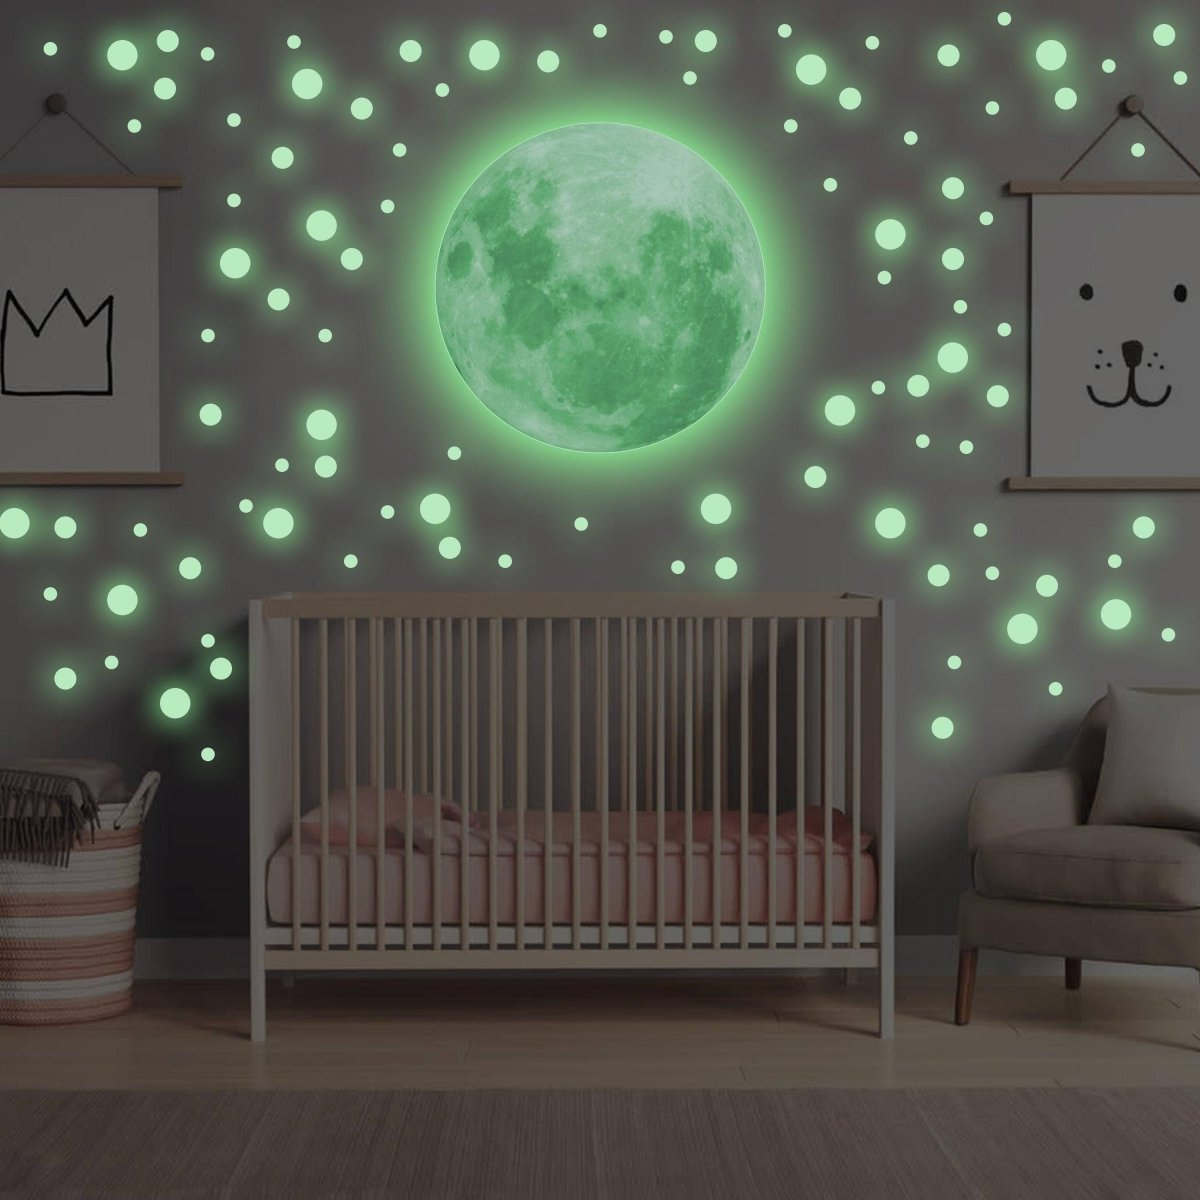 Glowing Celestial Night Sky Wall Decal - Luminous Space Theme Stickers